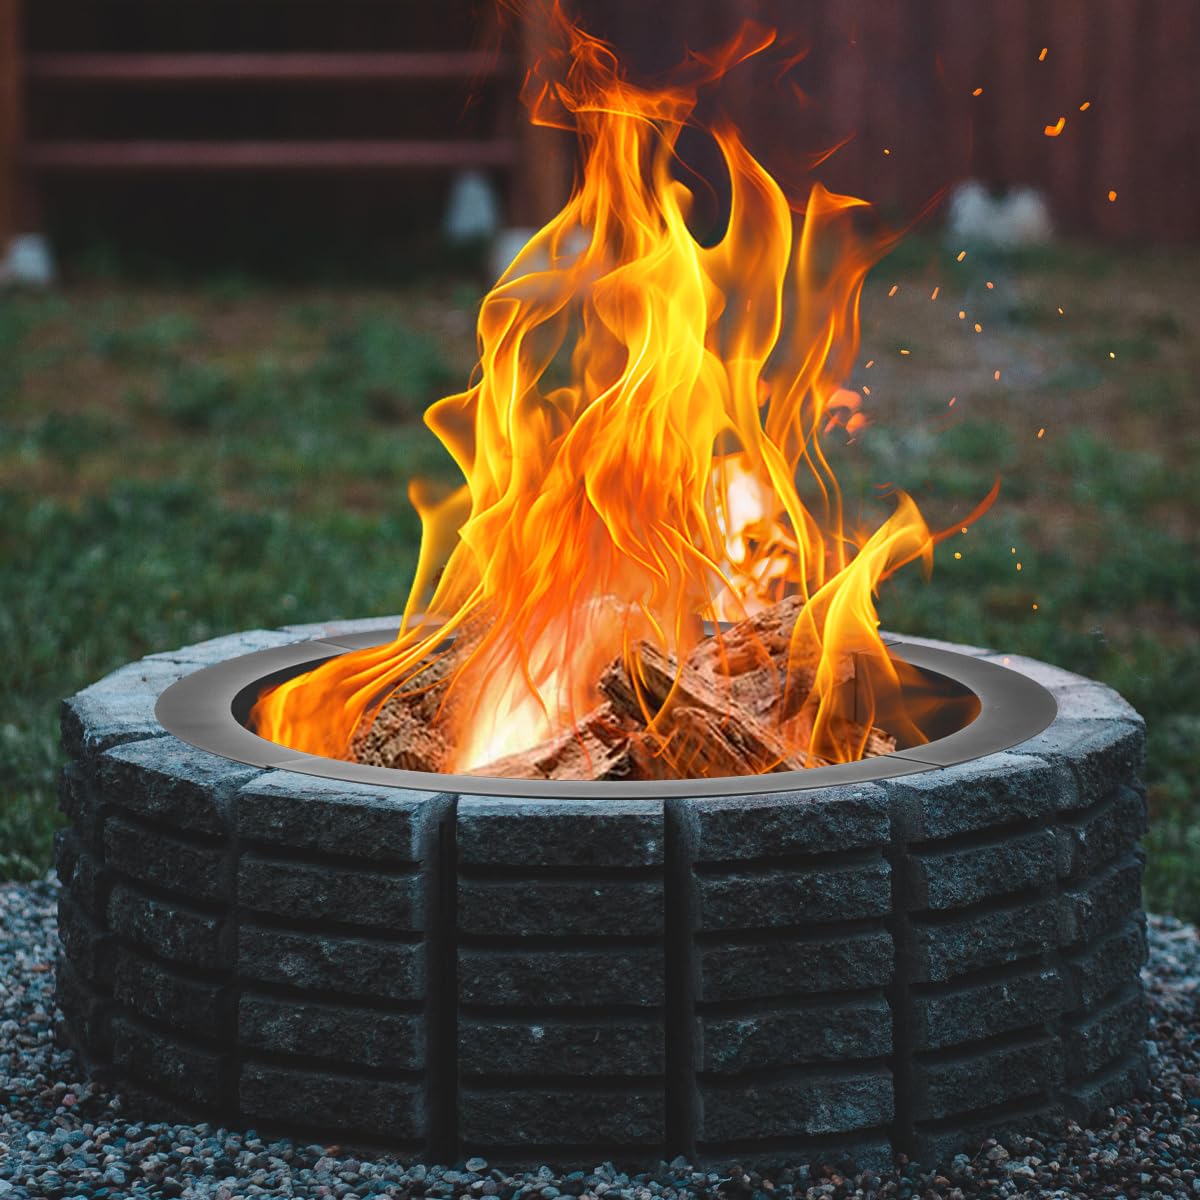 36 inch Fire Pit Ring for Outside,Heavy Duty Wood Burning Fire Pit Ring Insert, DIY Fire Pit Liner Campfire Ring Above or In-Ground for Outdoor